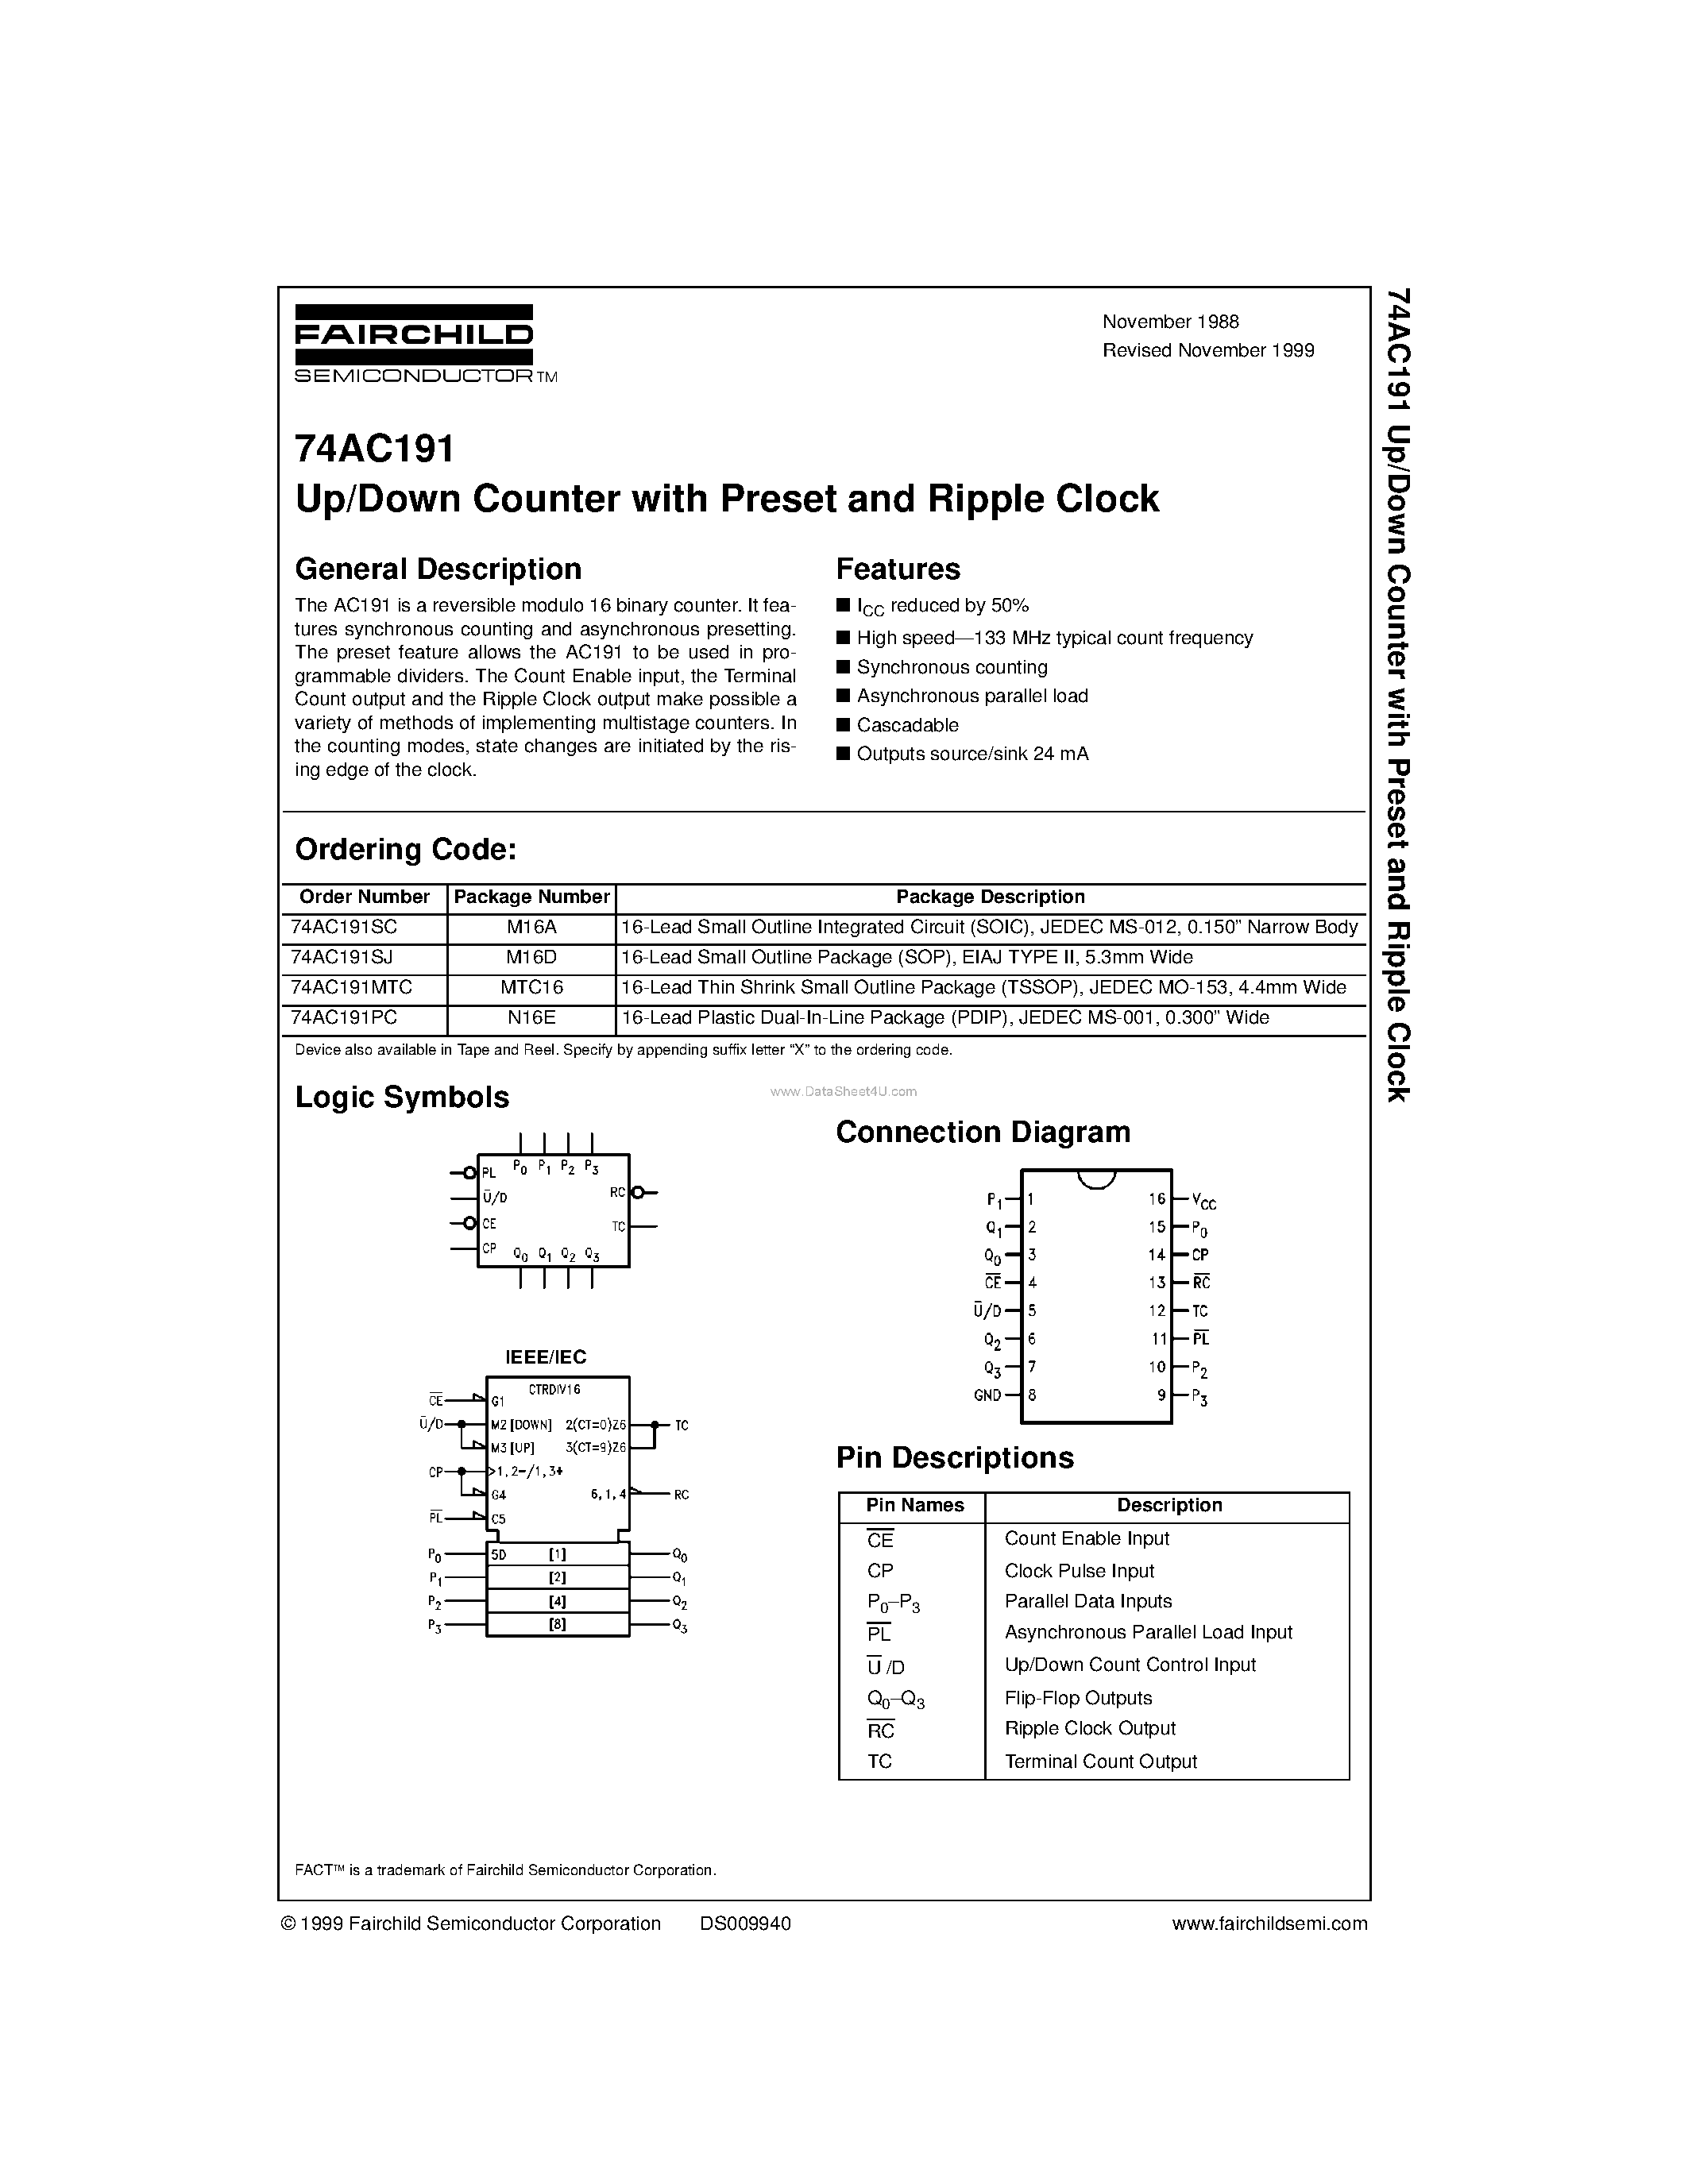 Datasheet 74AC191MTC - Up/Down Counter with Preset and Ripple Clock page 1